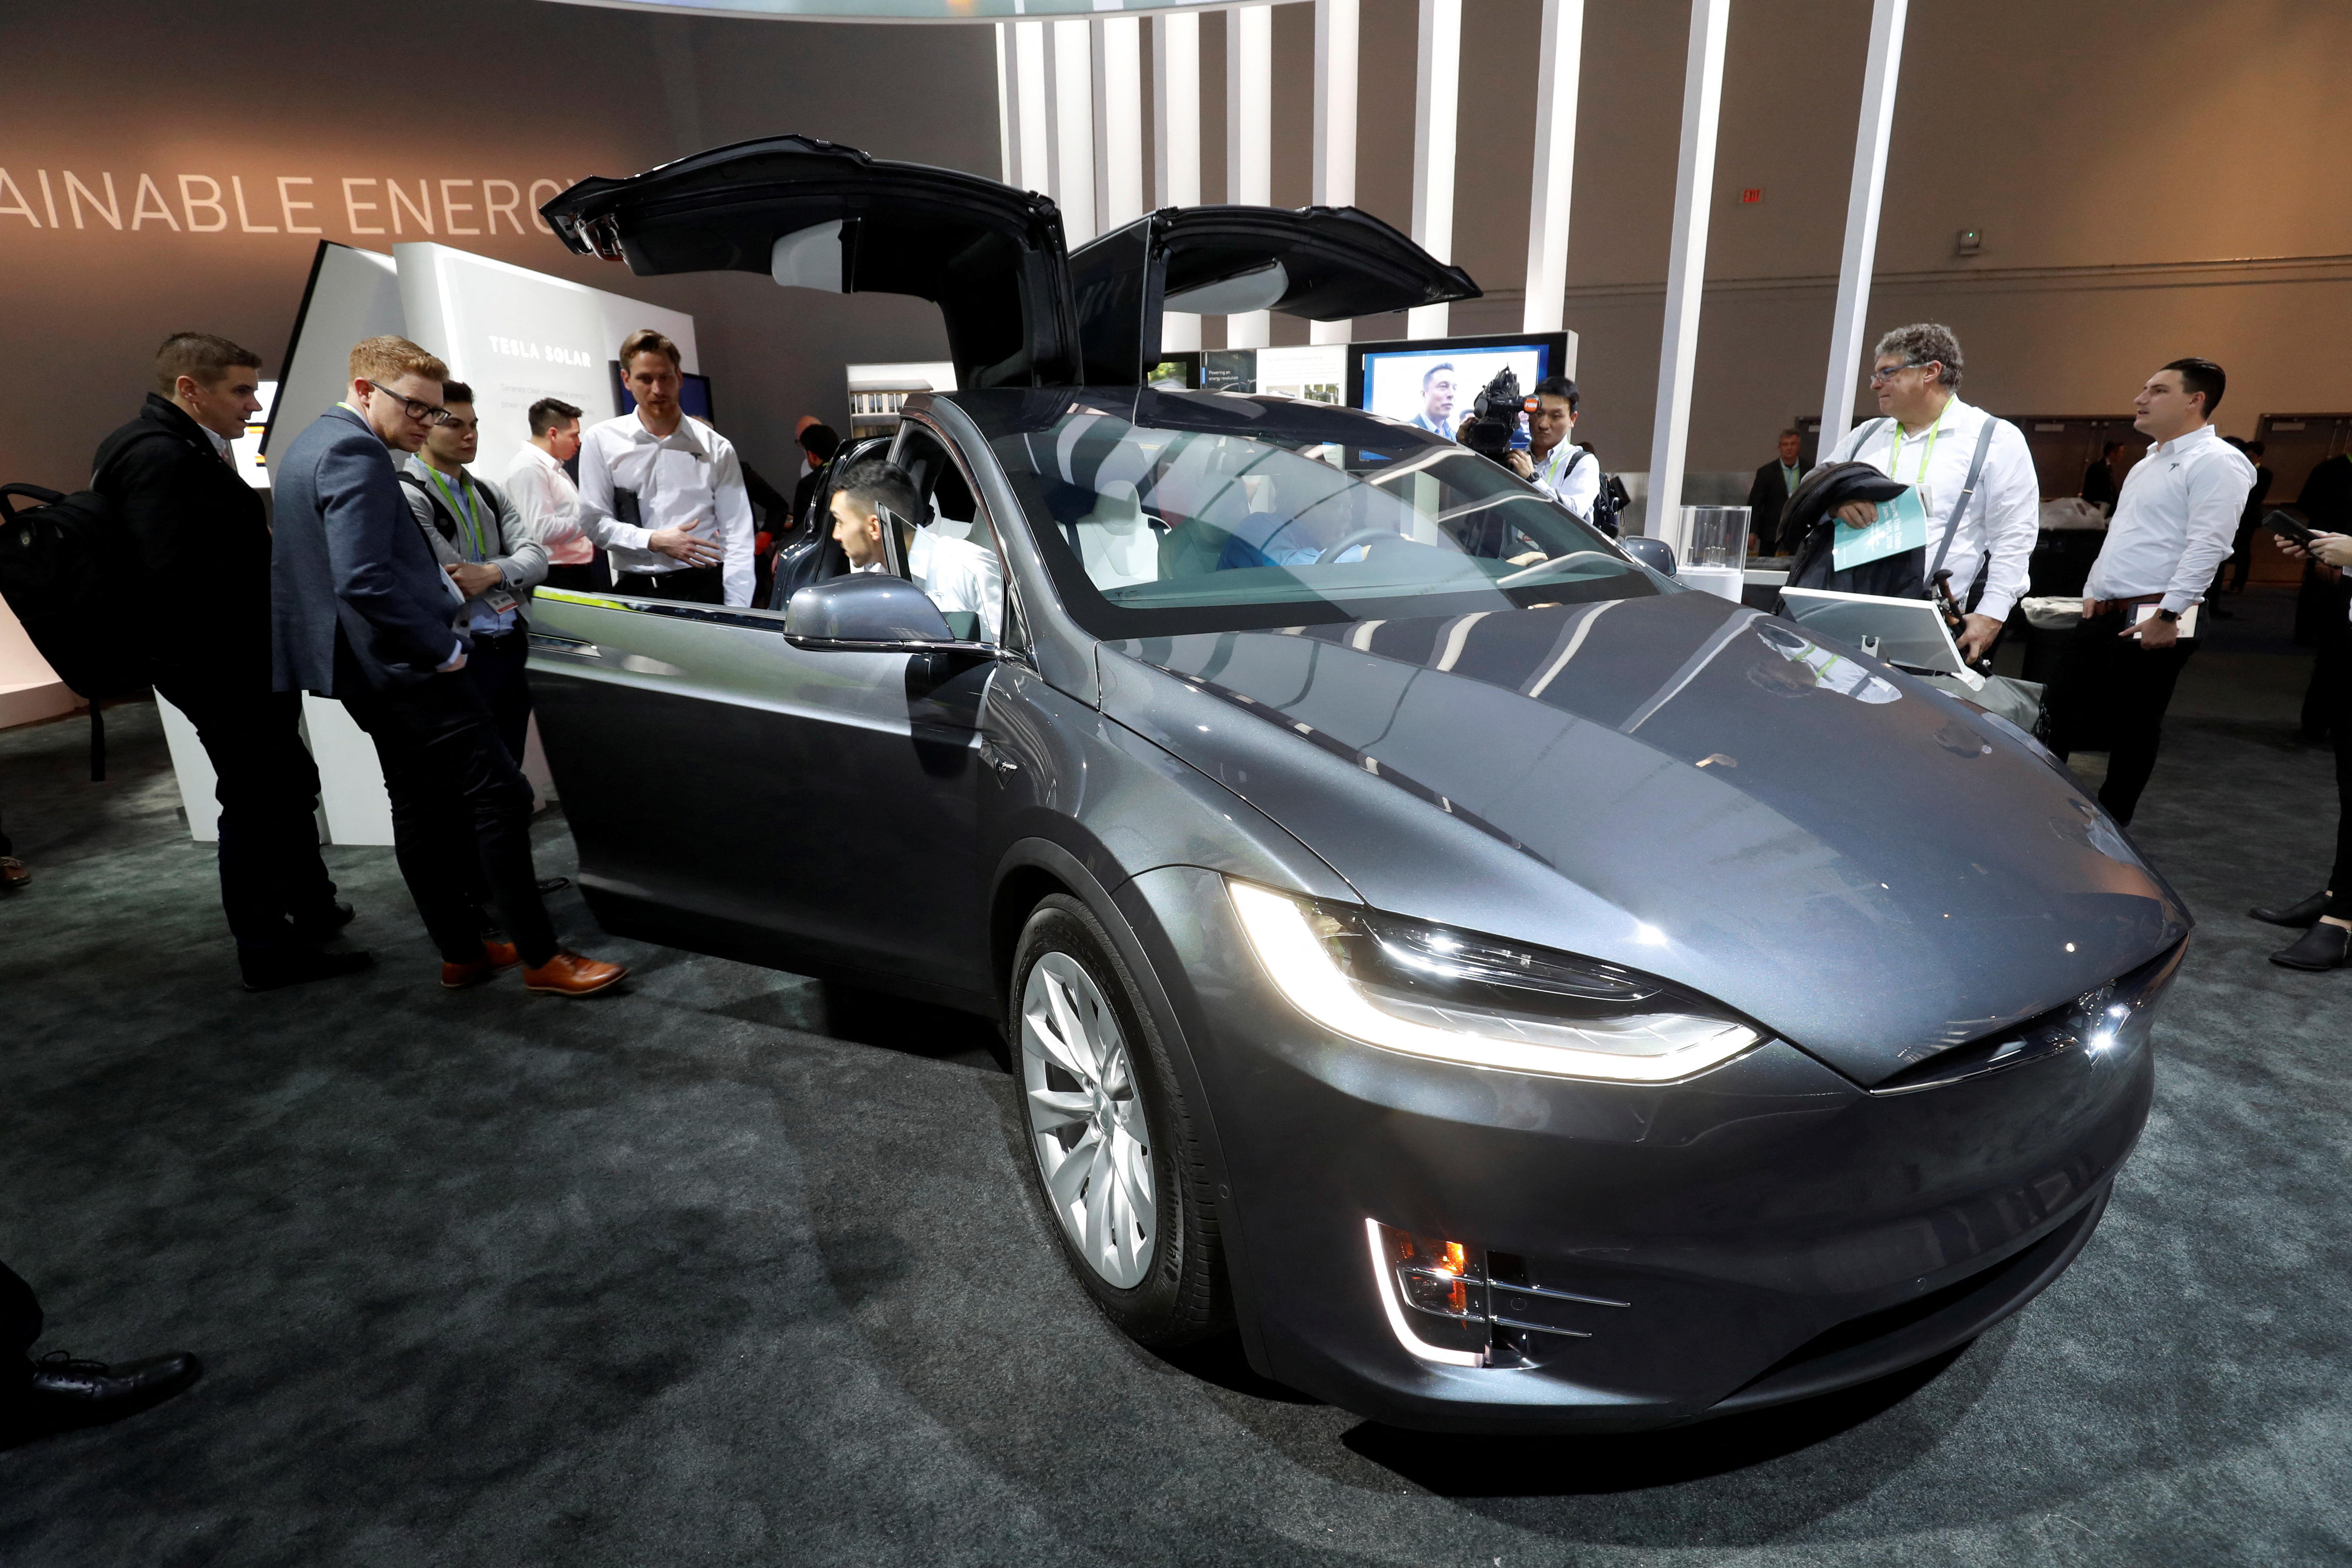 Attendees look over a Tesla Model X powered by Panasonic batteries at the Las Vegas Convention Center during the 2018 CES in Las Vegas